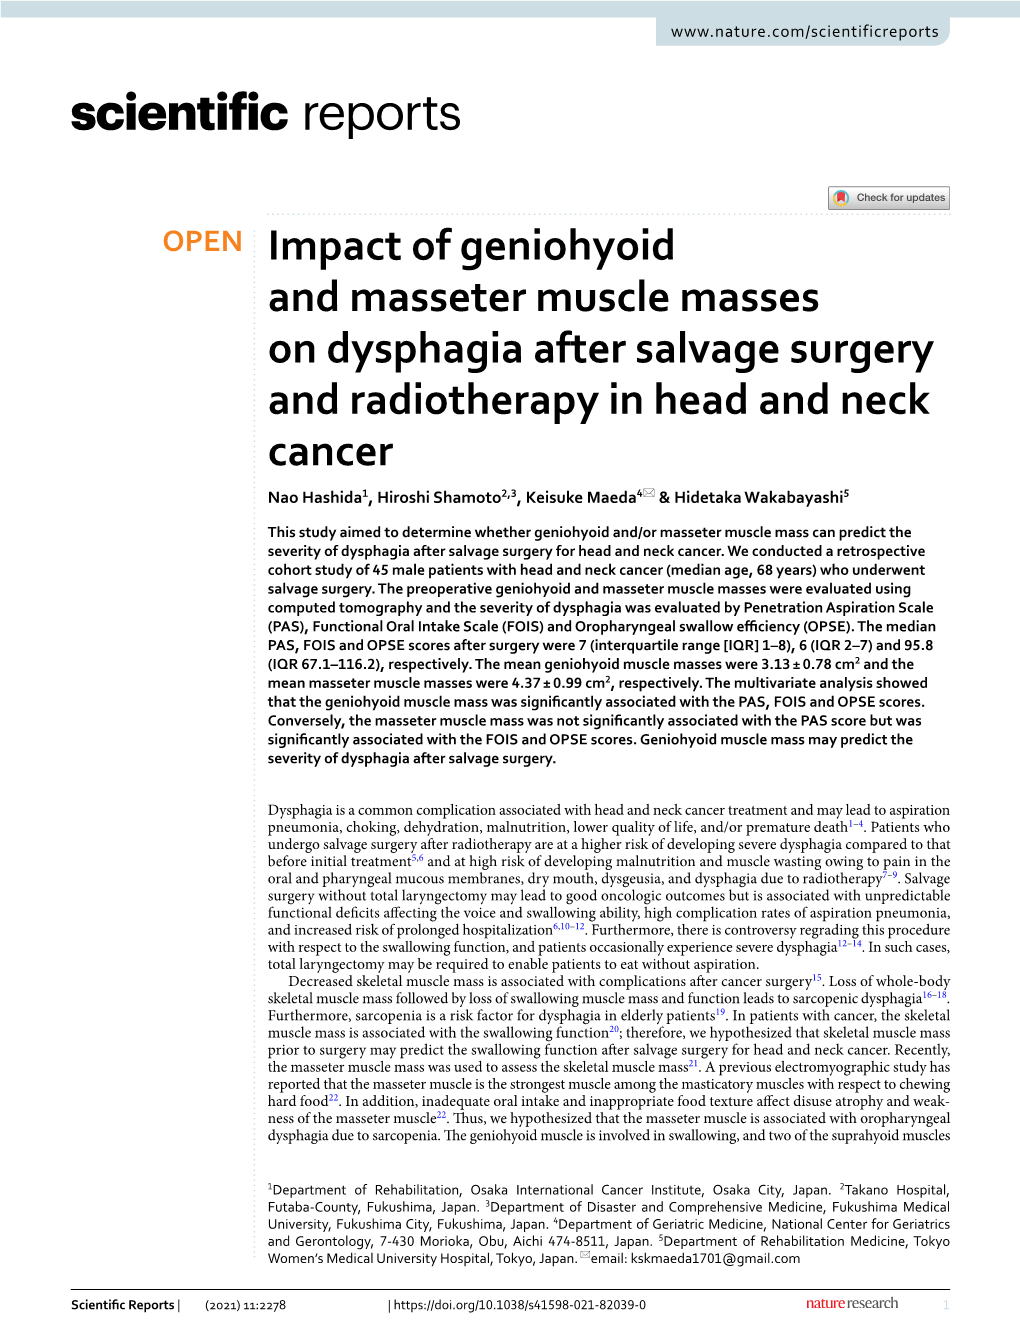 Impact of Geniohyoid and Masseter Muscle Masses on Dysphagia After